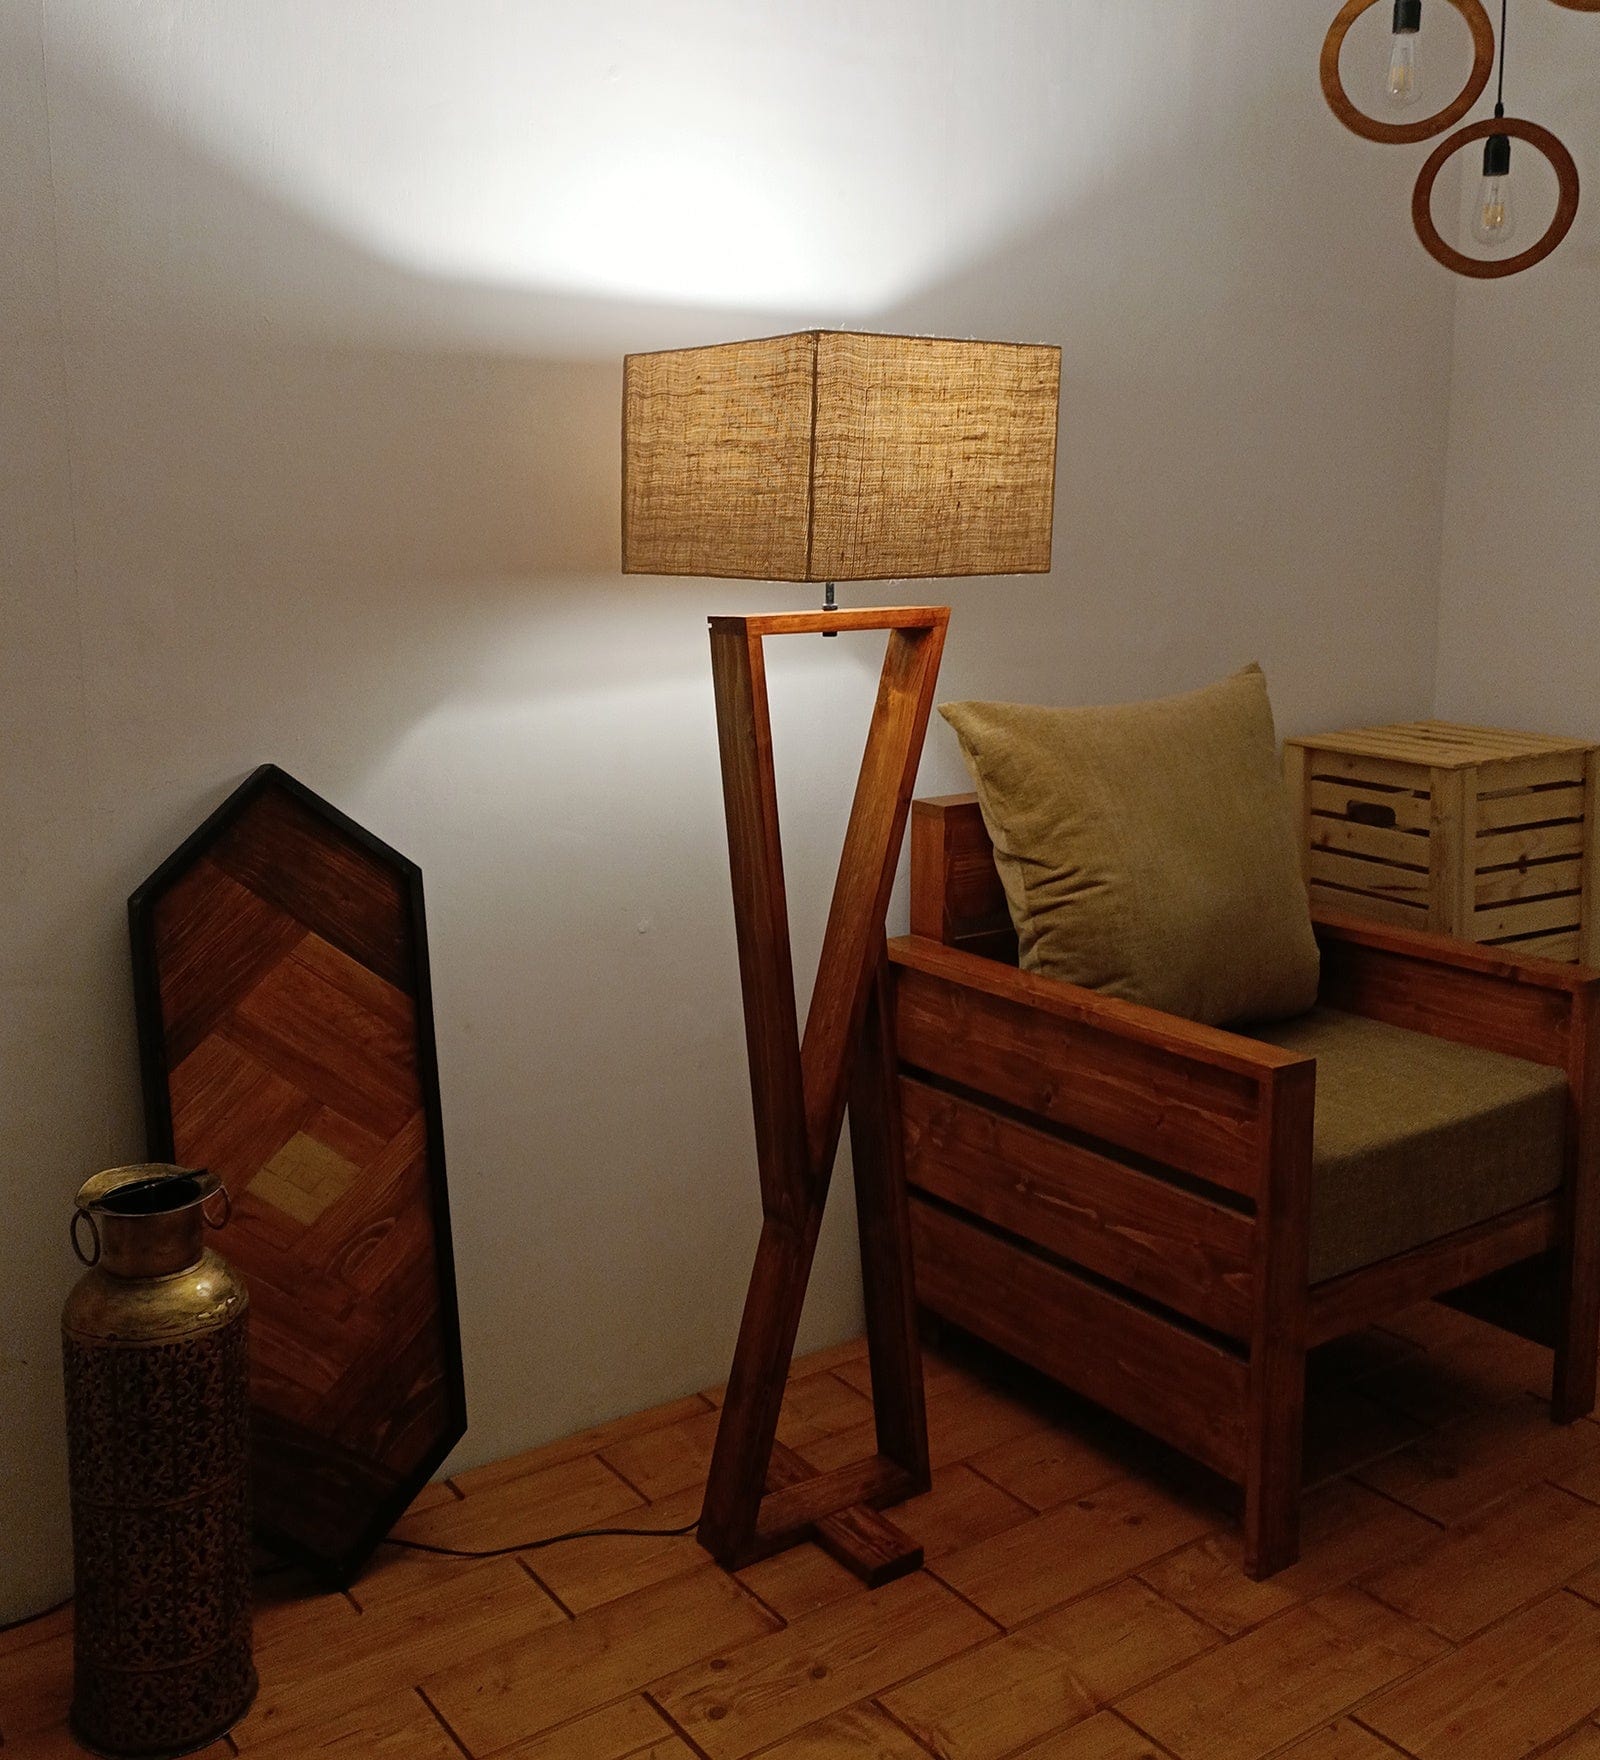 Chloe Wooden Floor Lamp with Brown Base and Jute Fabric Lampshade (BULB NOT INCLUDED)